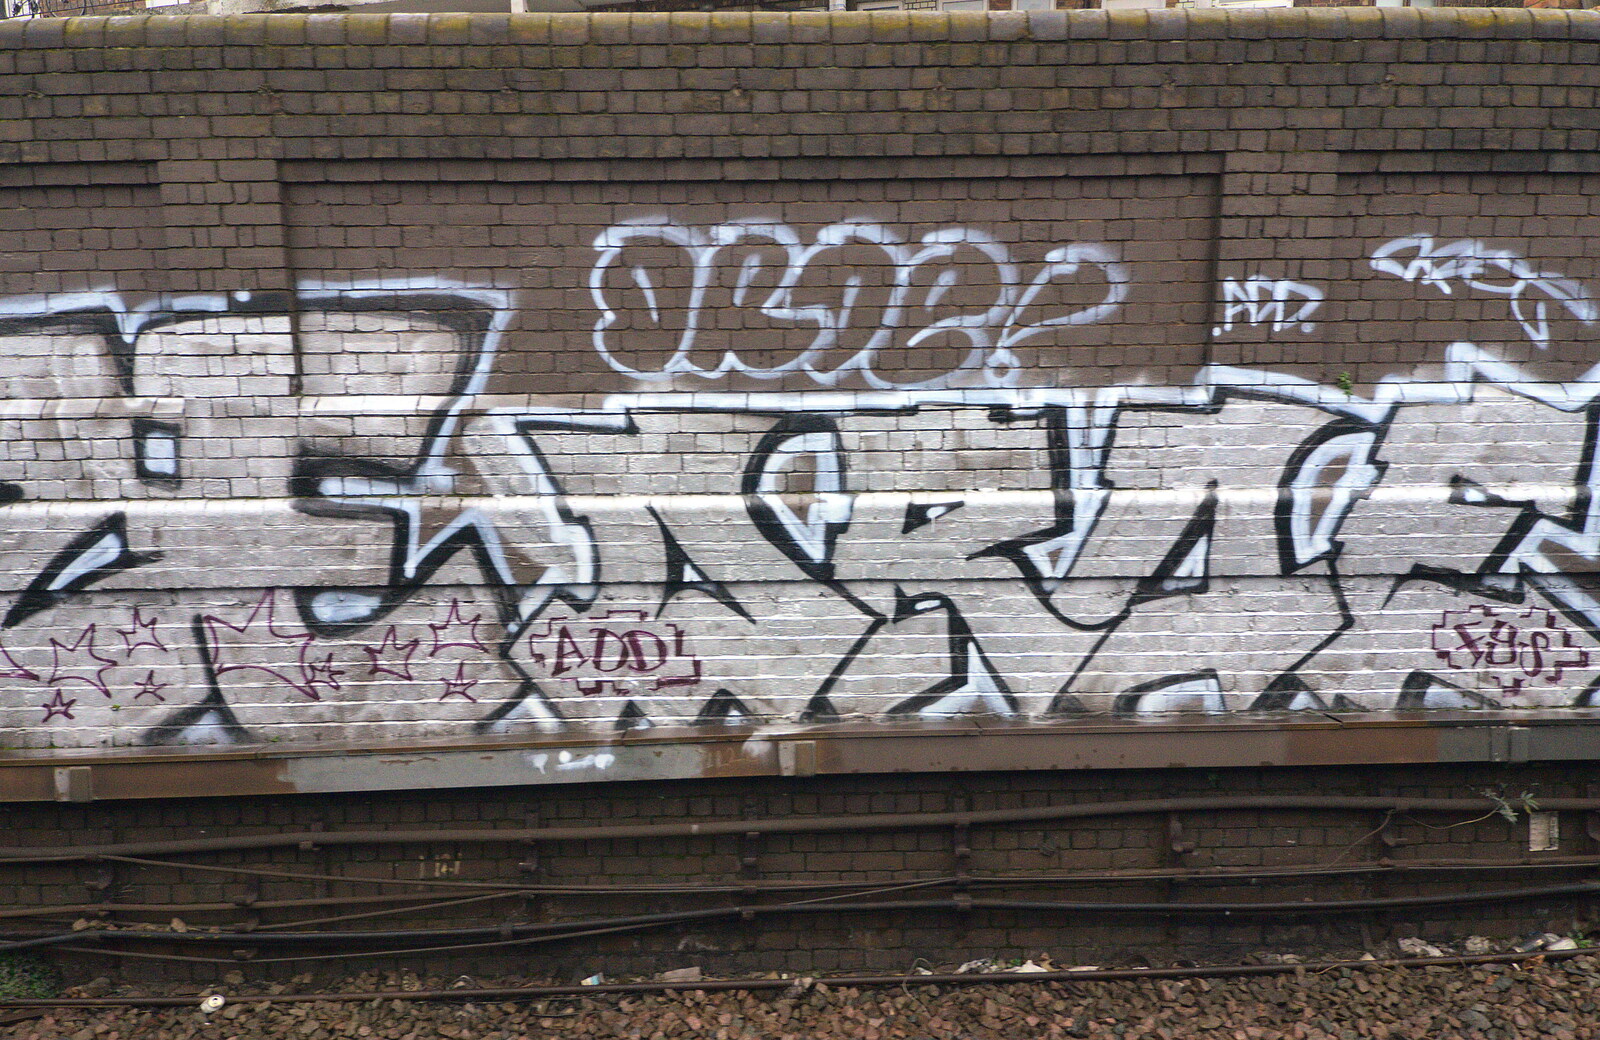 More silver graffiti from The Demolition of the Bacon Factory, Ipswich, Suffolk - 20th February 2013